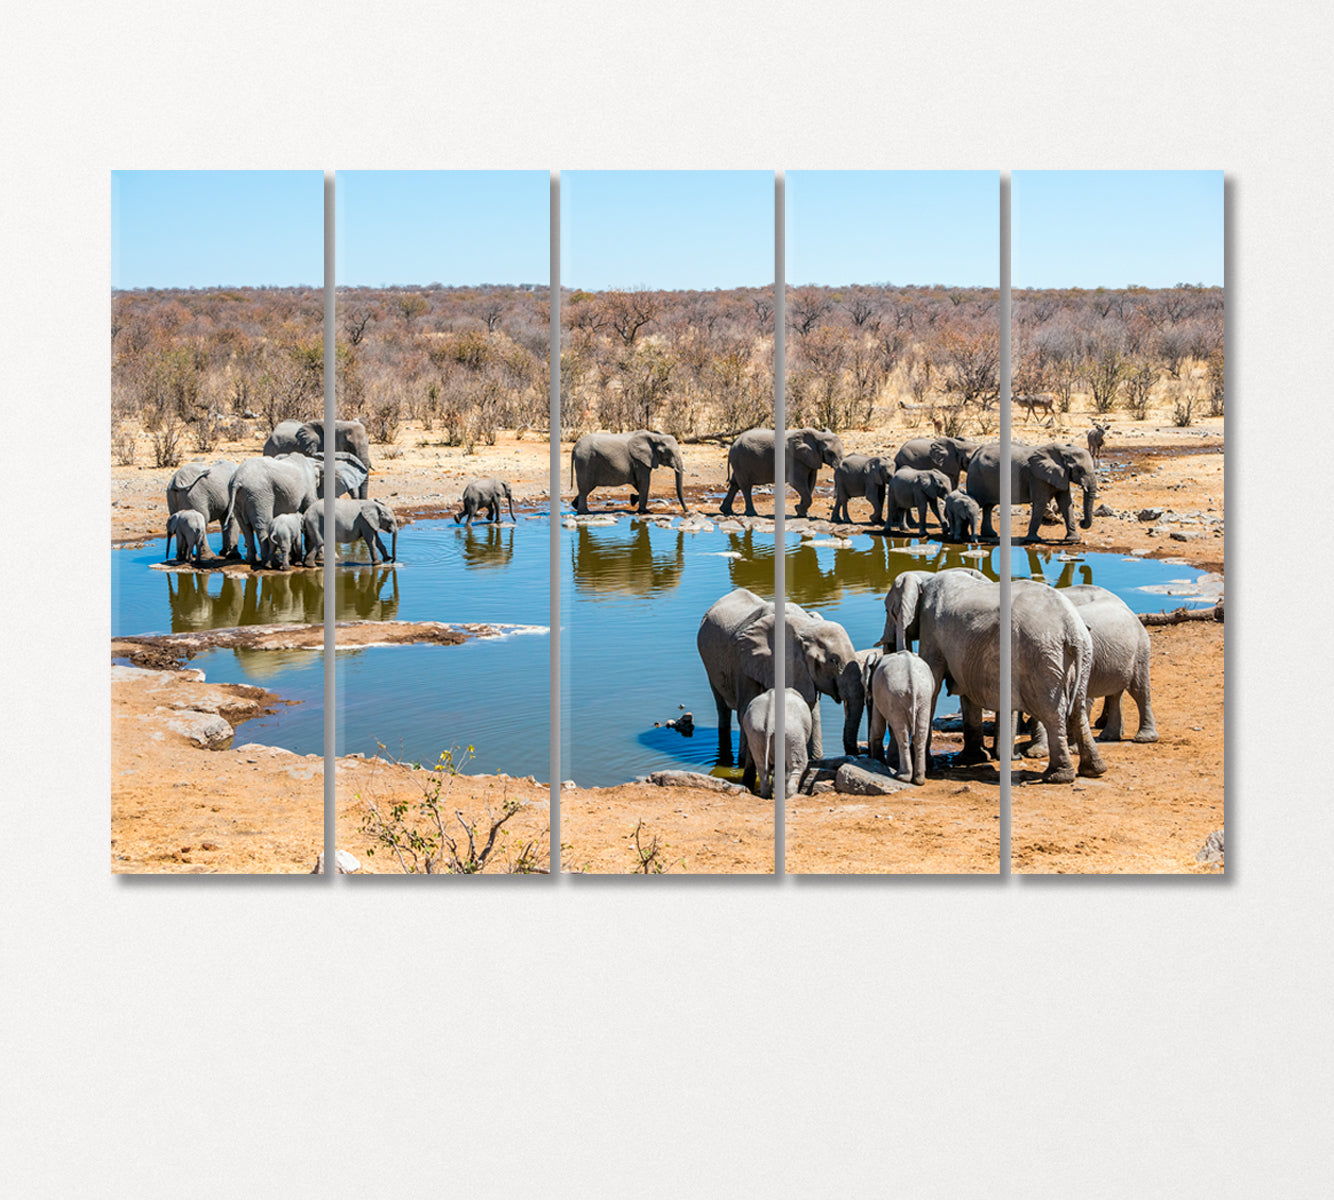 Large Family of African Elephants Drinking at a Waterhole Canvas Print-Canvas Print-CetArt-5 Panels-36x24 inches-CetArt